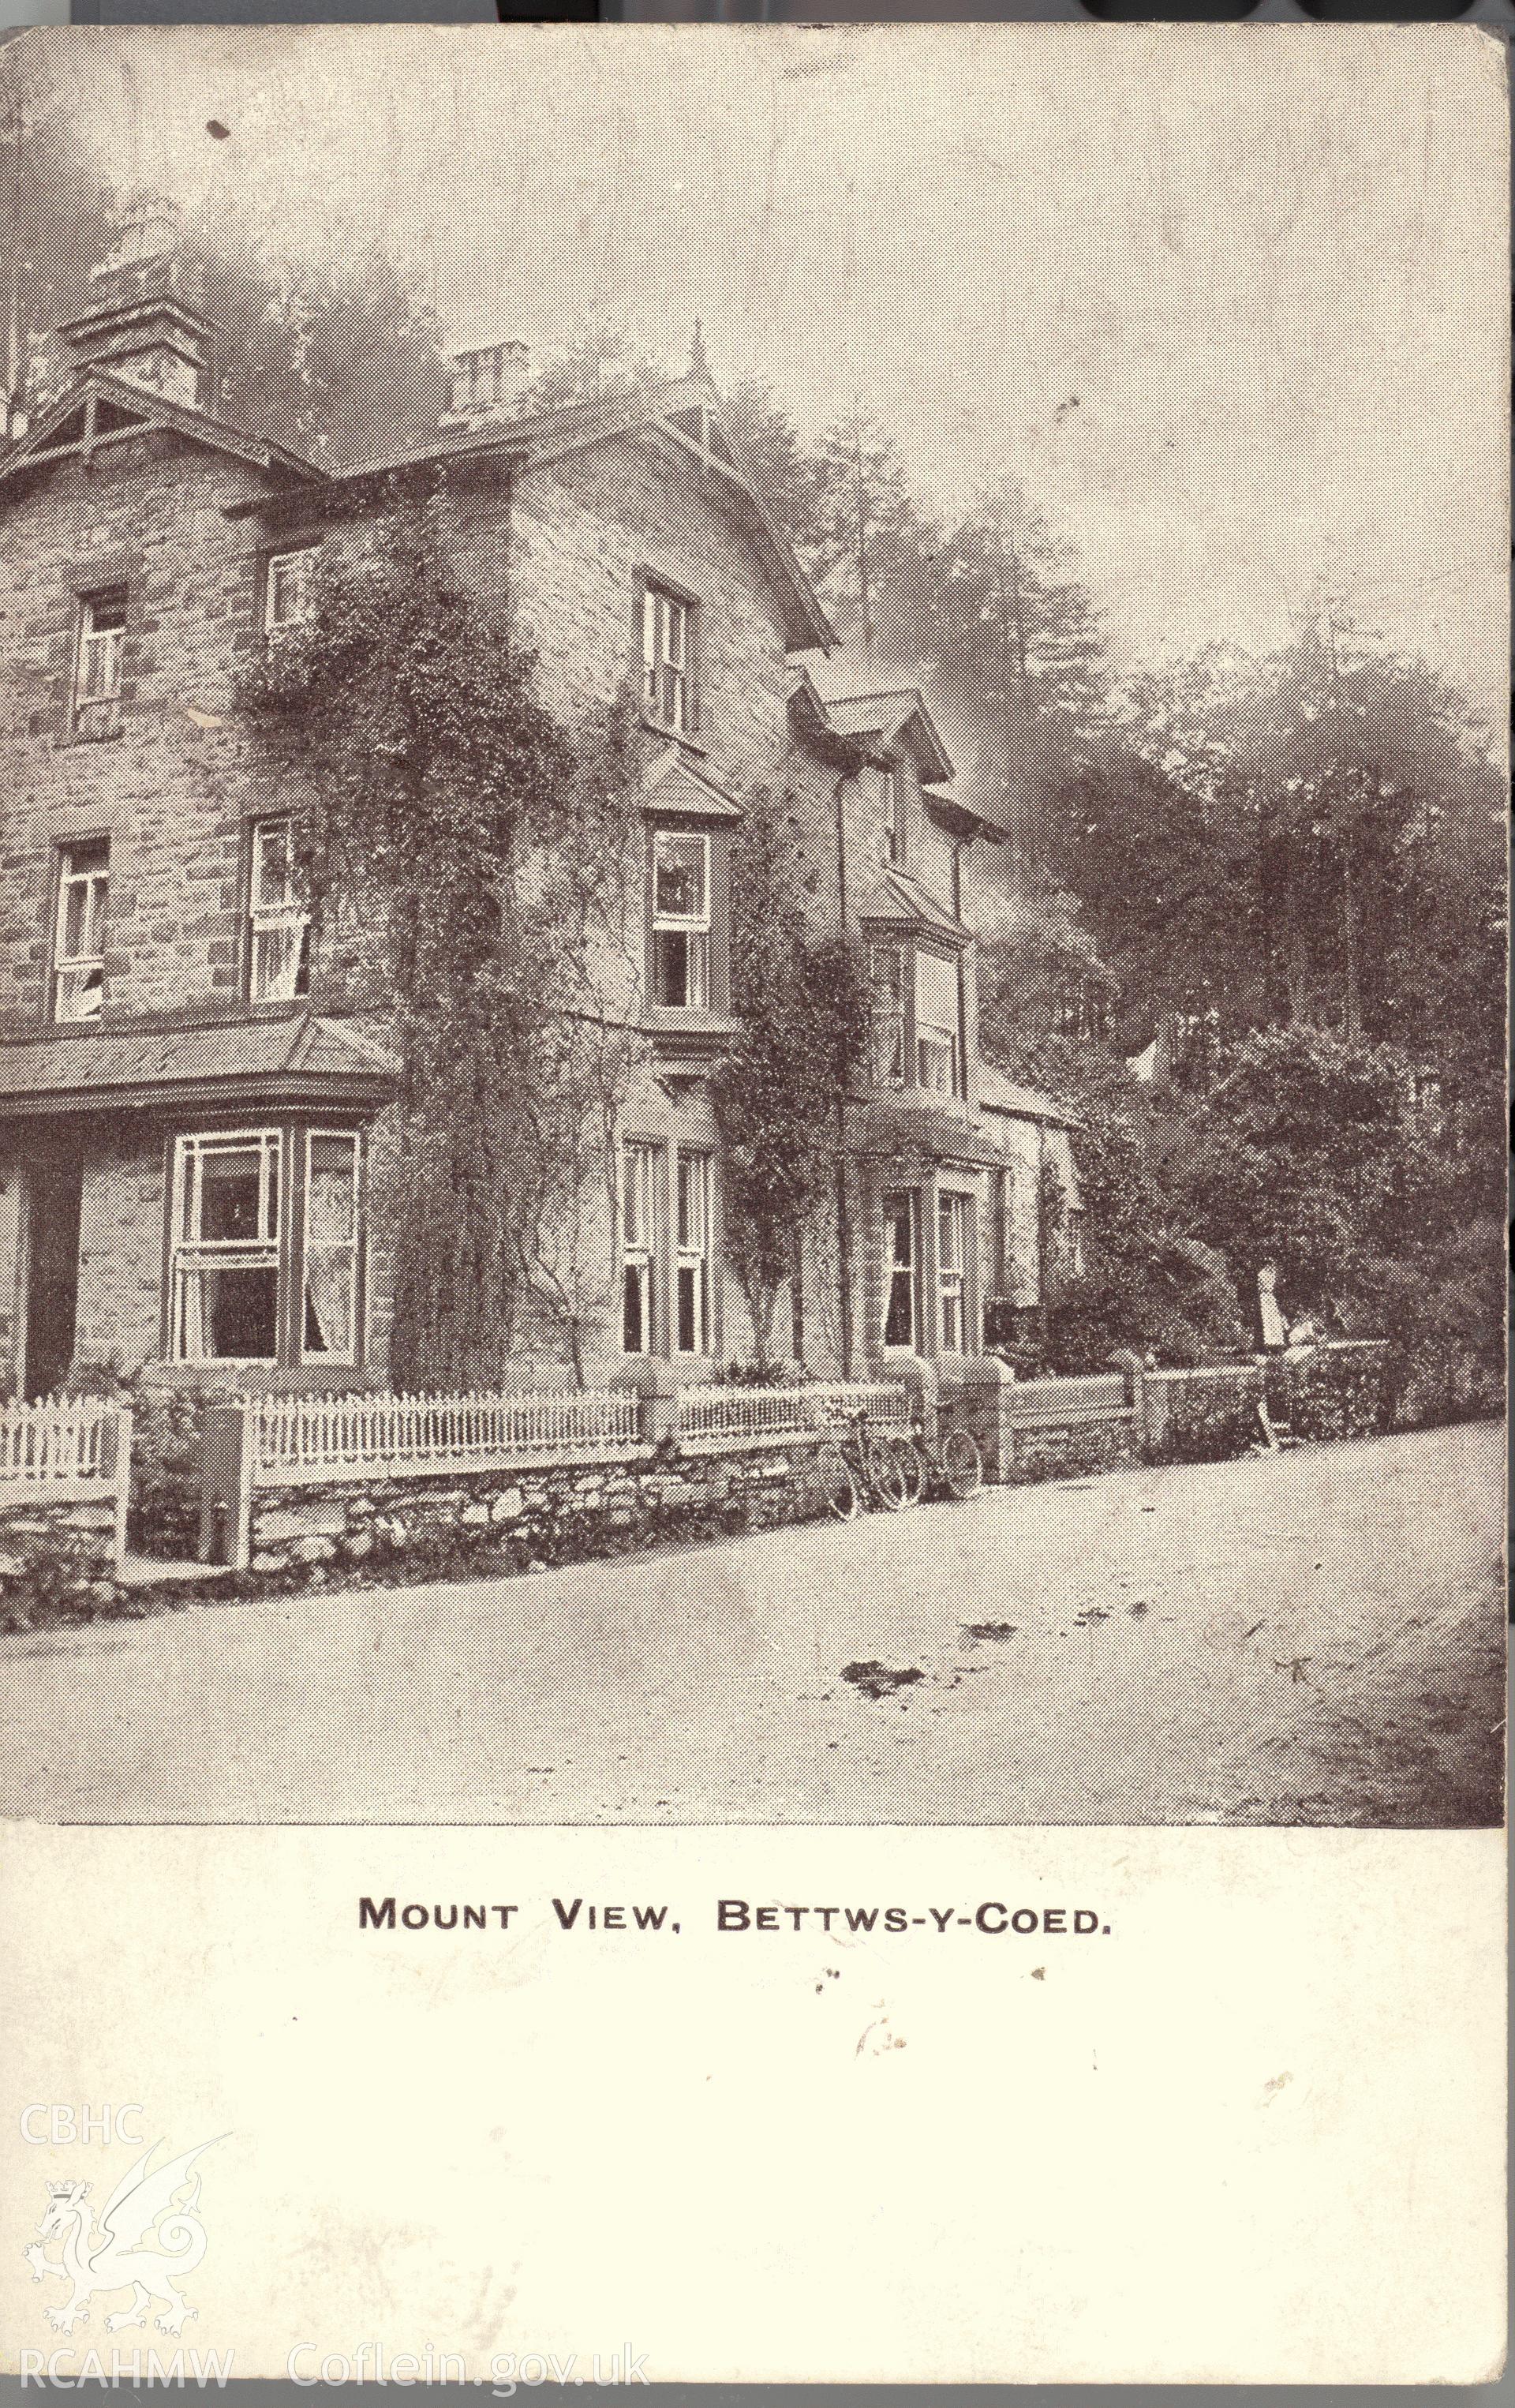 Digitised postcard image of Mount View, Betws-y-Coed. Produced by Parks and Gardens Data Services, from an original item in the Peter Davis Collection at Parks and Gardens UK. We hold only web-resolution images of this collection, suitable for viewing on screen and for research purposes only. We do not hold the original images, or publication quality scans.